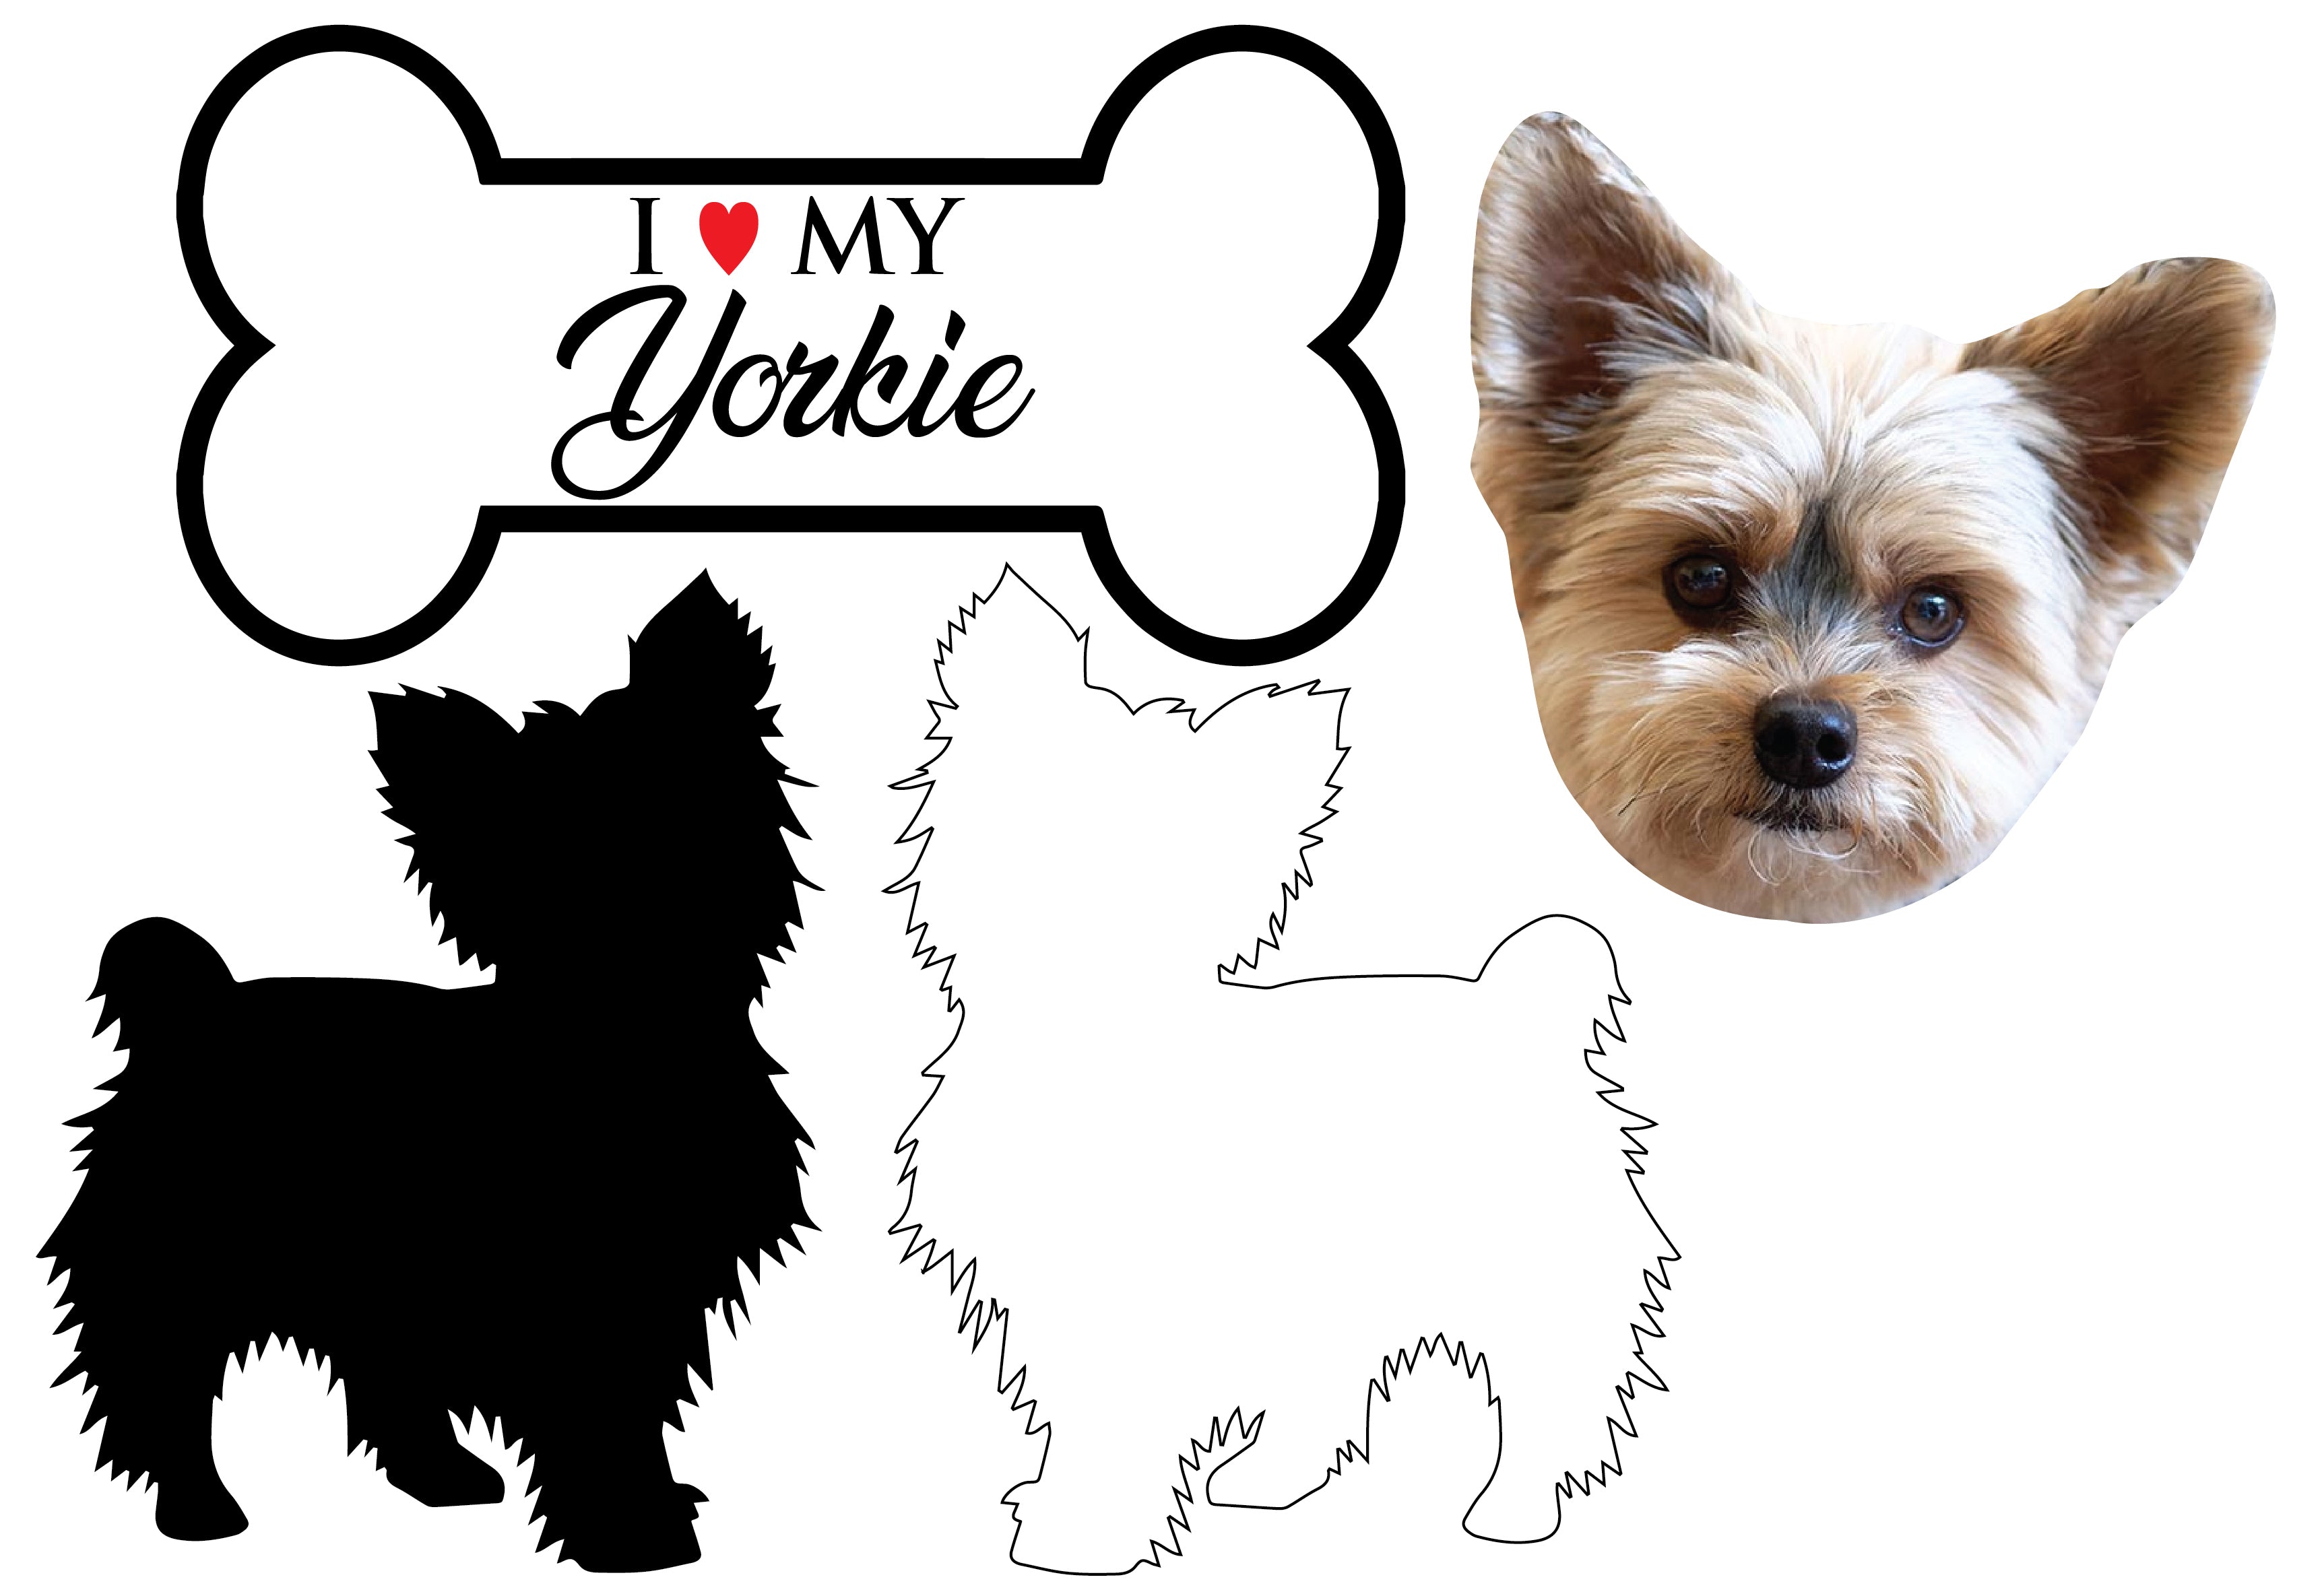 Yorkie - Dog Breed Decals (Set of 16) - Sizes in Description